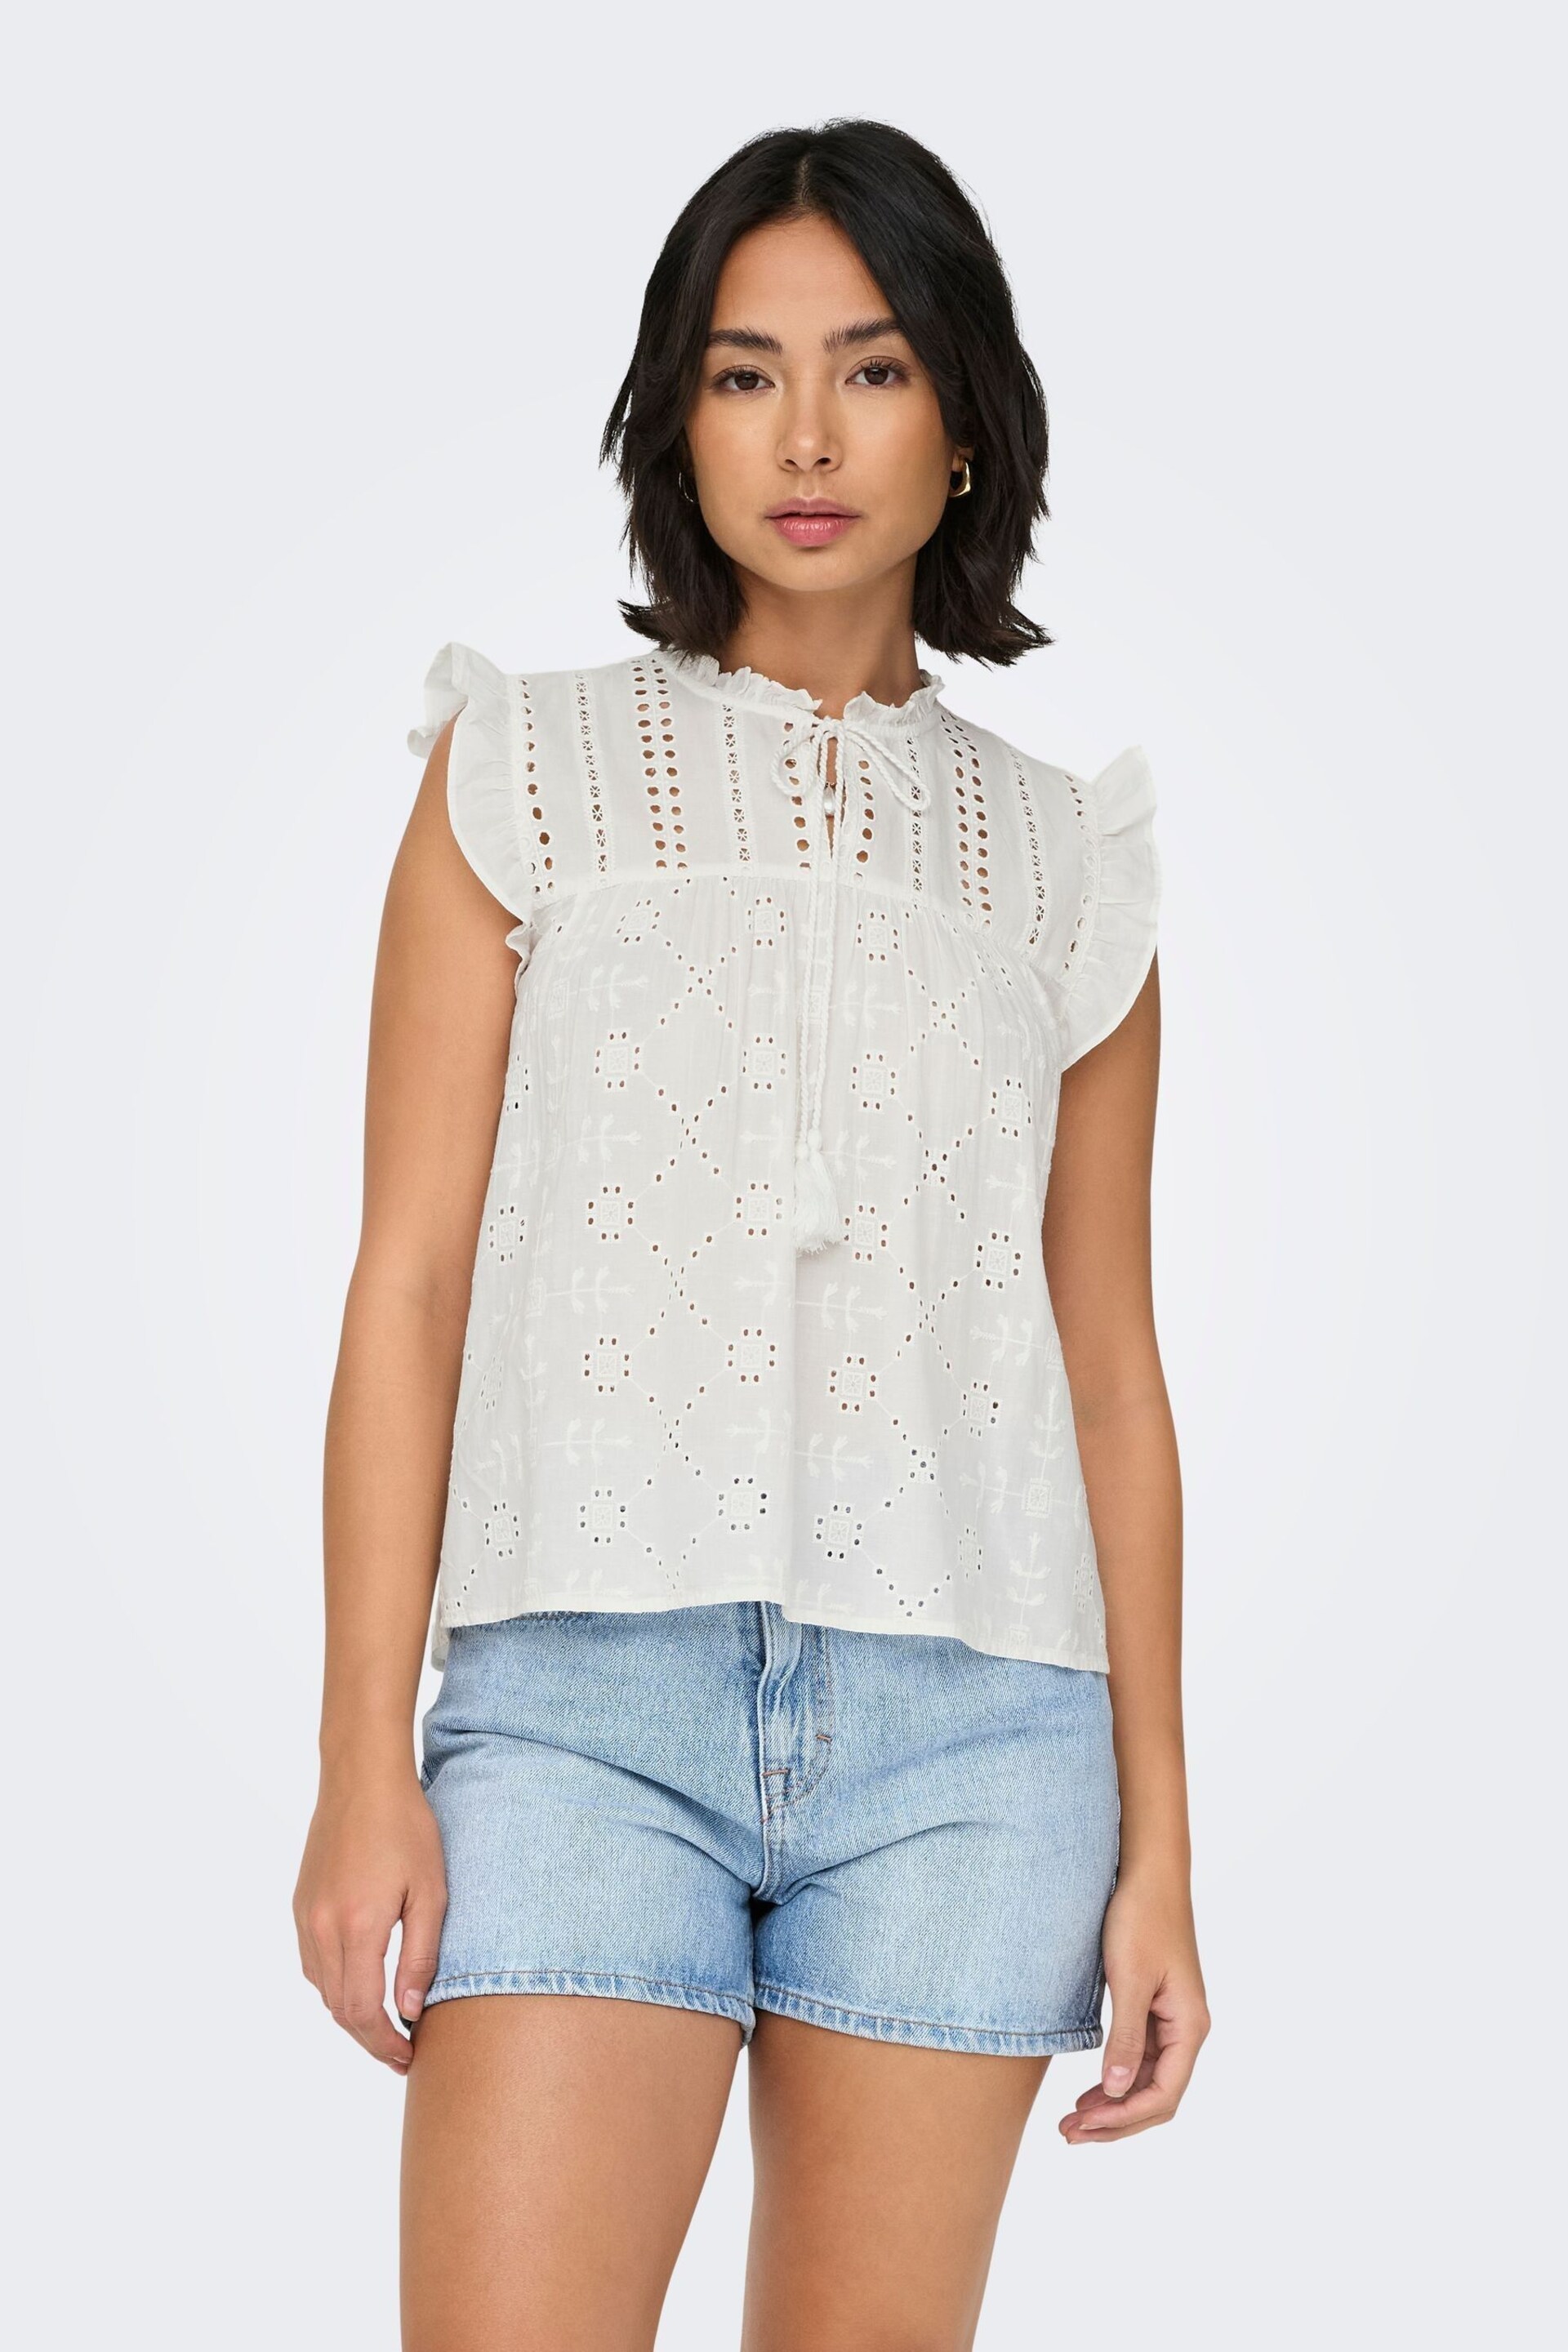 ONLY White Broderie Frill Tie Front Blouse - Image 5 of 7